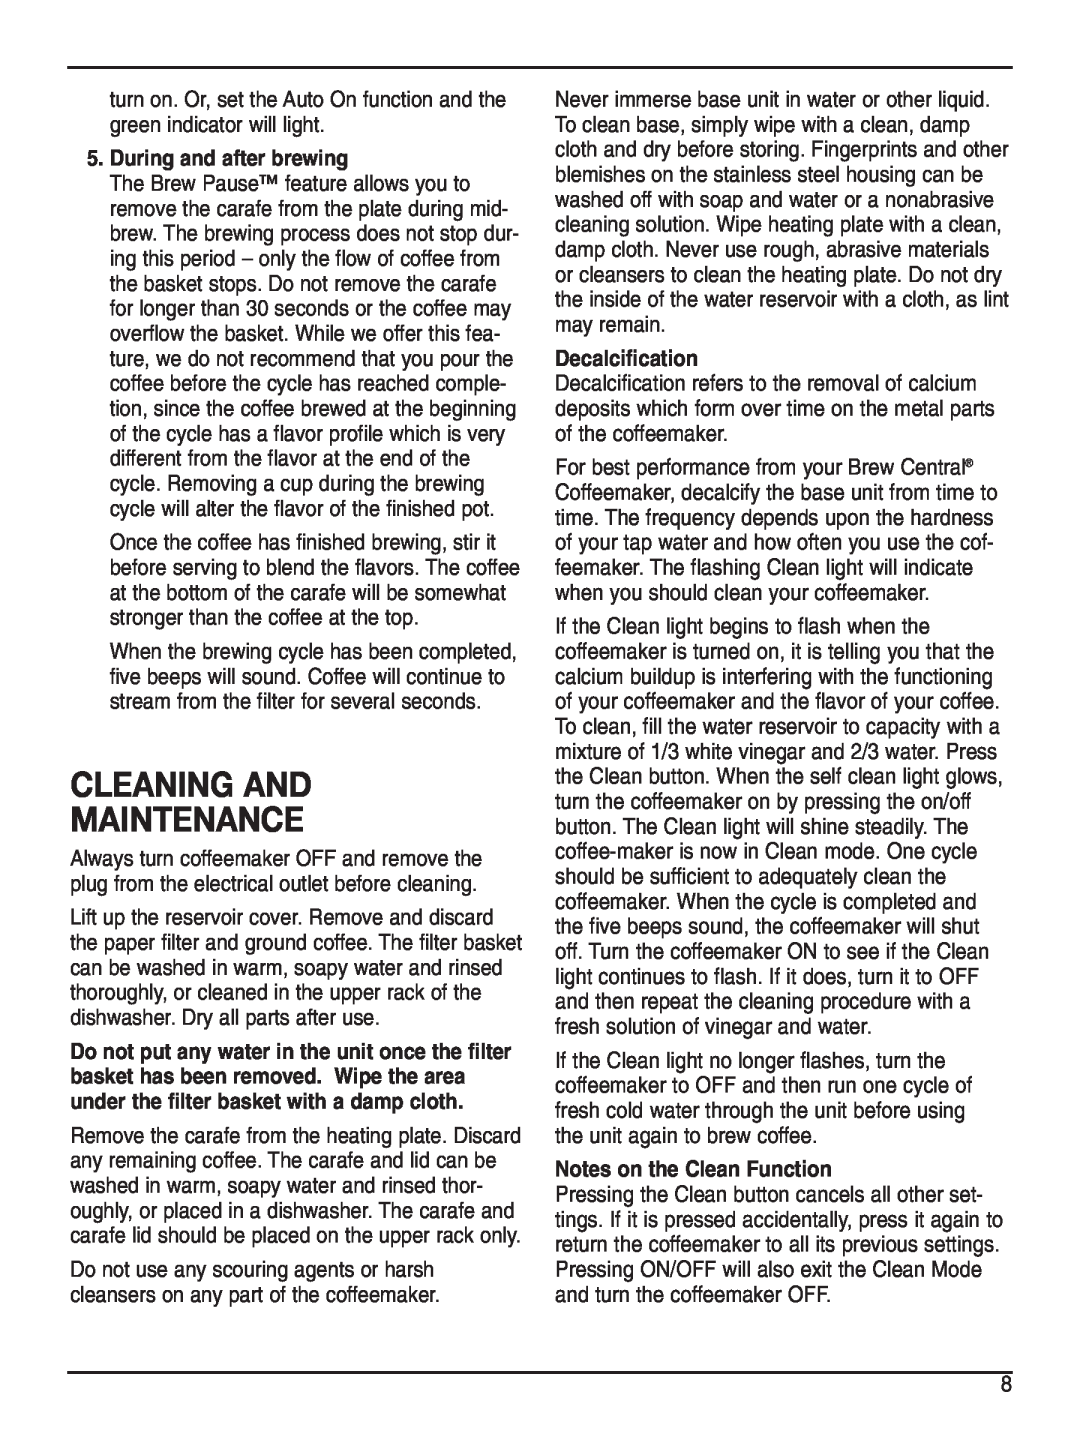 Cuisinart DCC-2200 manual Cleaning And Maintenance, During and after brewing, Decalcification, Notes on the Clean Function 